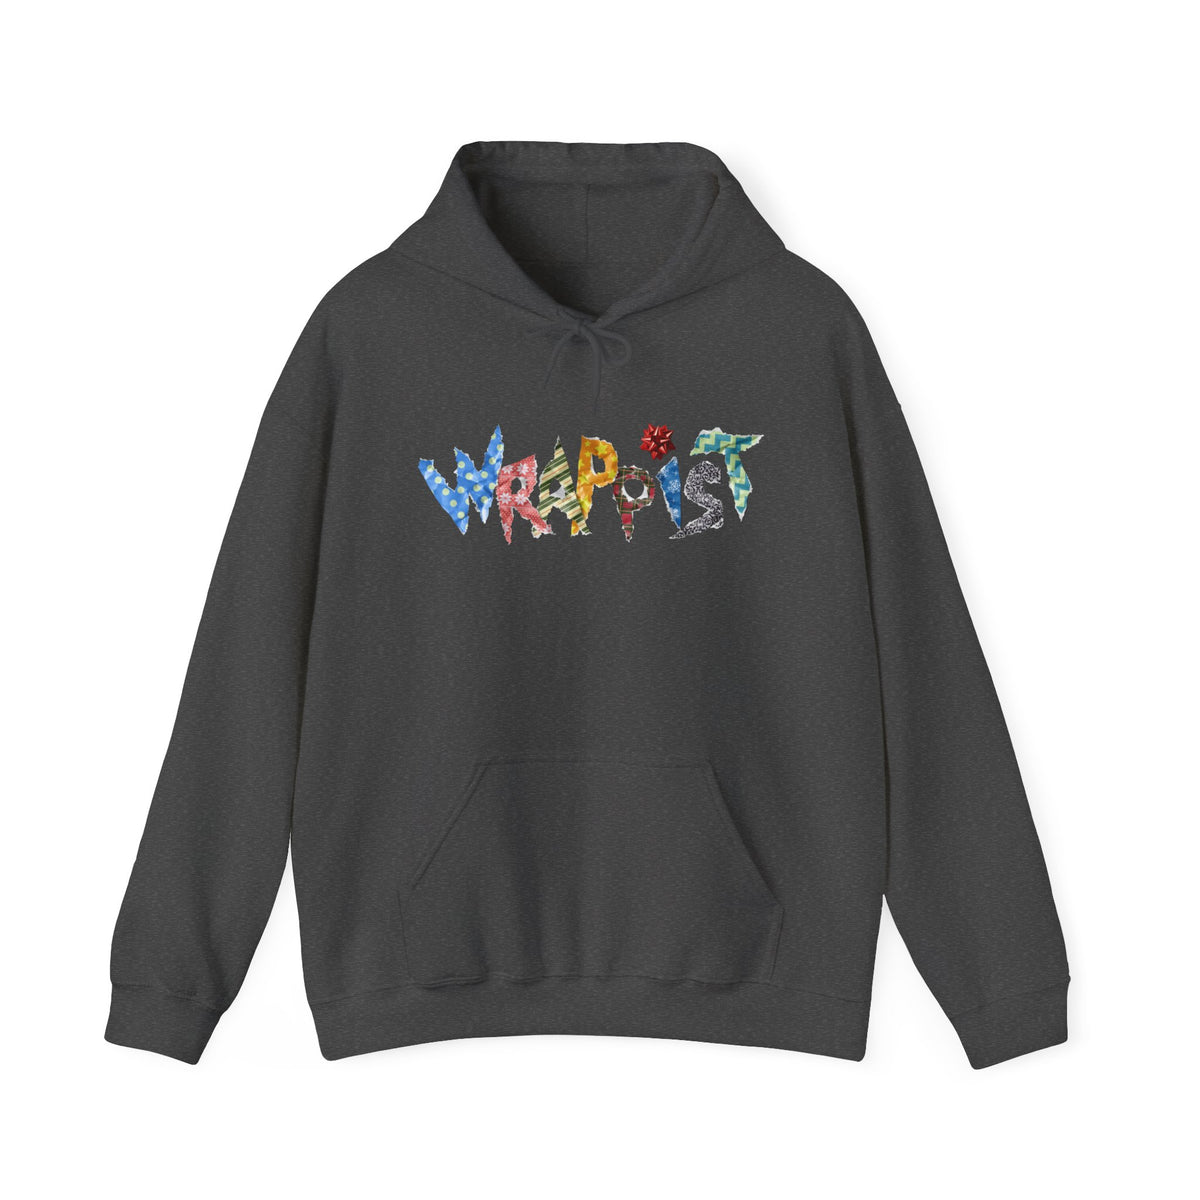 Wrappist - Hoodie